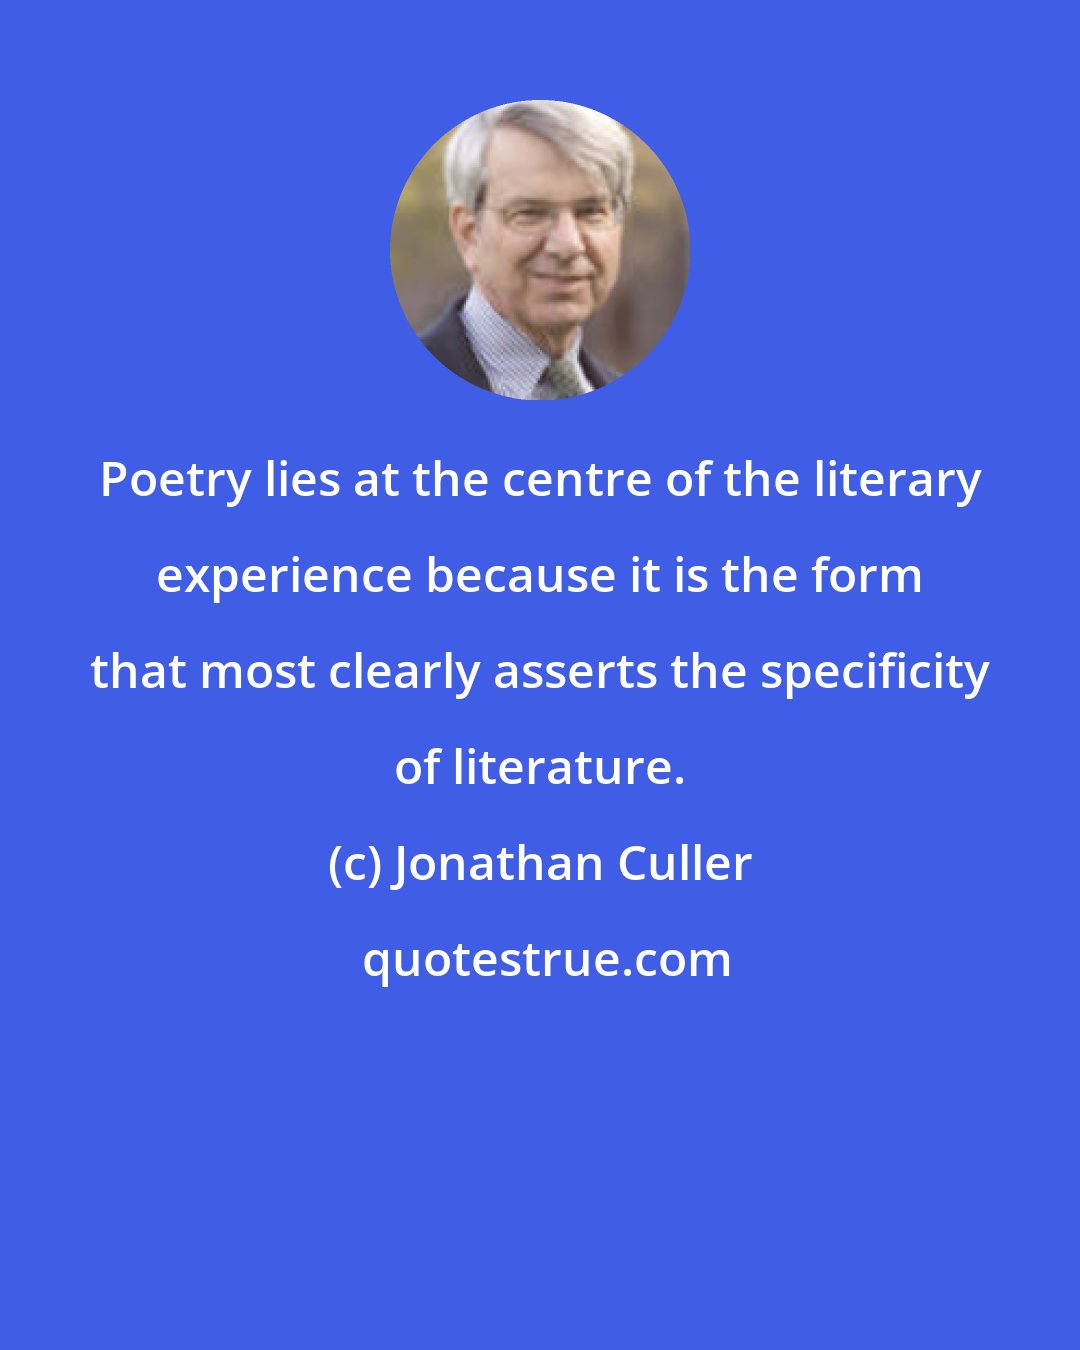 Jonathan Culler: Poetry lies at the centre of the literary experience because it is the form that most clearly asserts the specificity of literature.